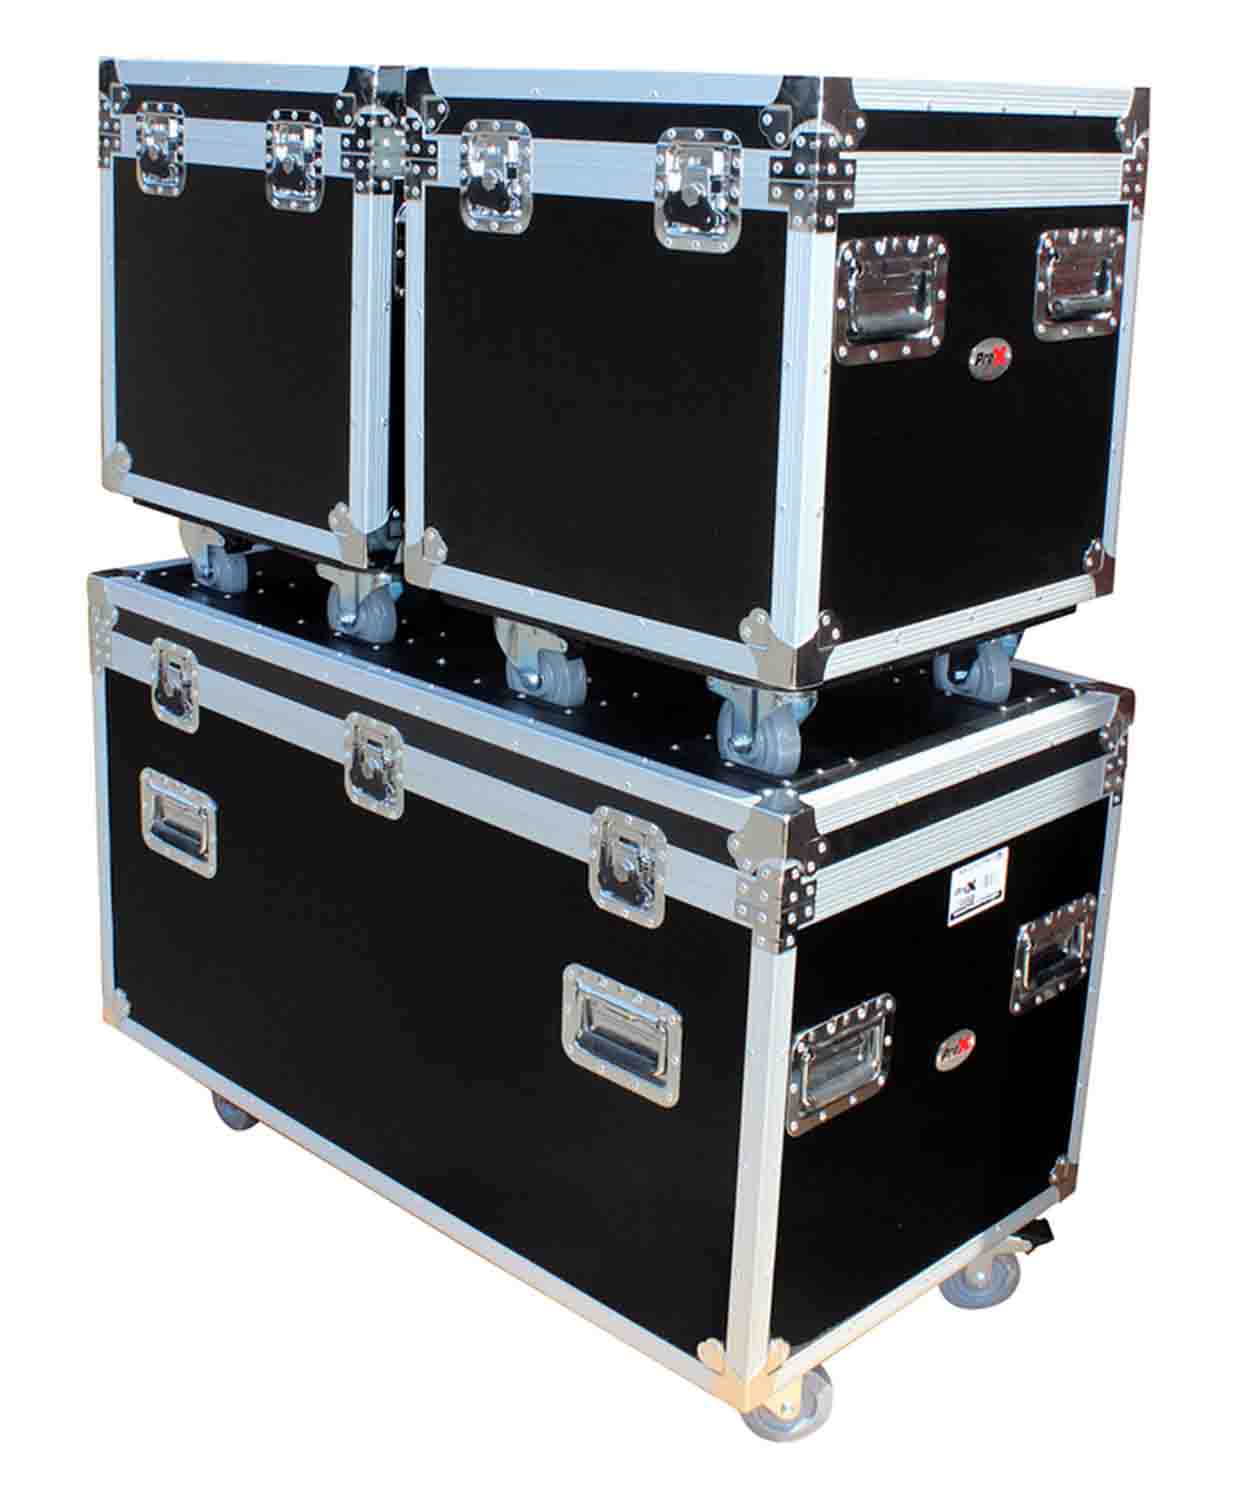 ProX XS-UTL3PKG Utility Storage ATA Style Road Cases 1 Large and 2 Half Size - 3 Case Package - Hollywood DJ